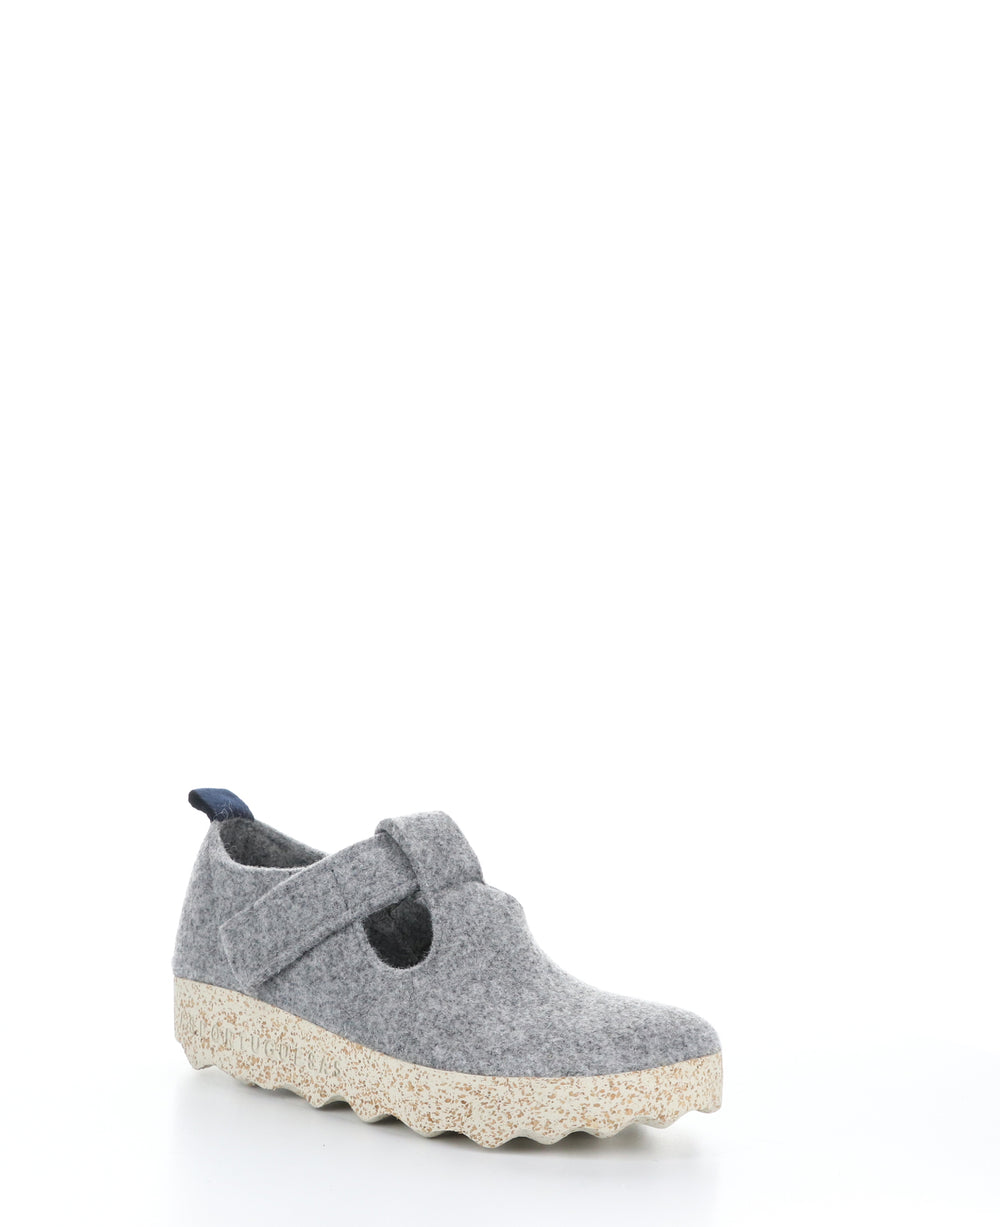 CATE085ASP Concrete Round Toe Shoes|CATE085ASP Chaussures à Bout Rond in Gris